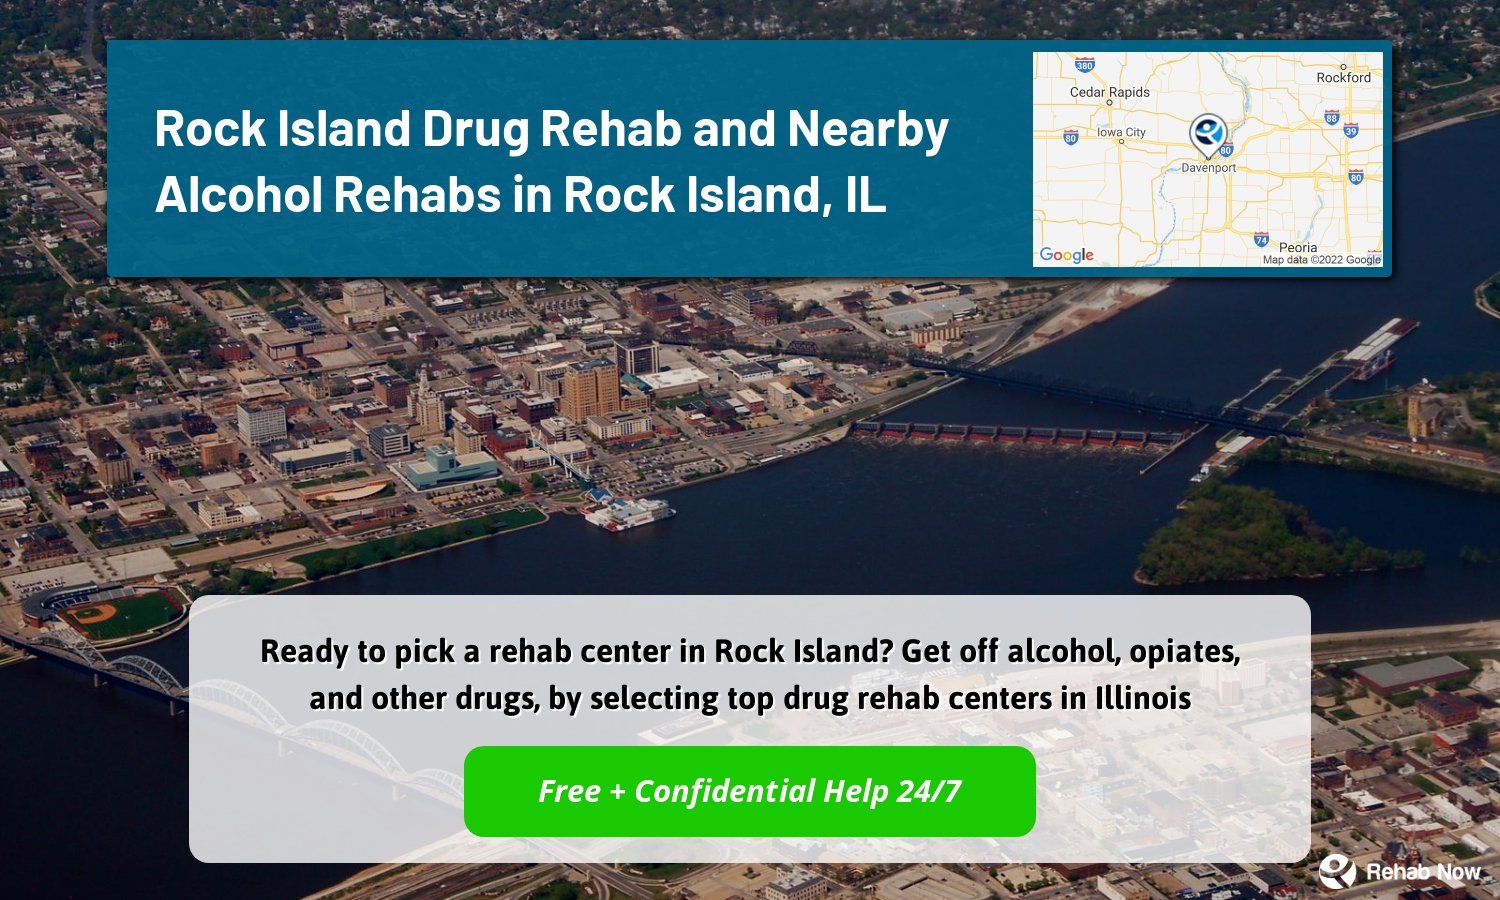 Ready to pick a rehab center in Rock Island? Get off alcohol, opiates, and other drugs, by selecting top drug rehab centers in Illinois